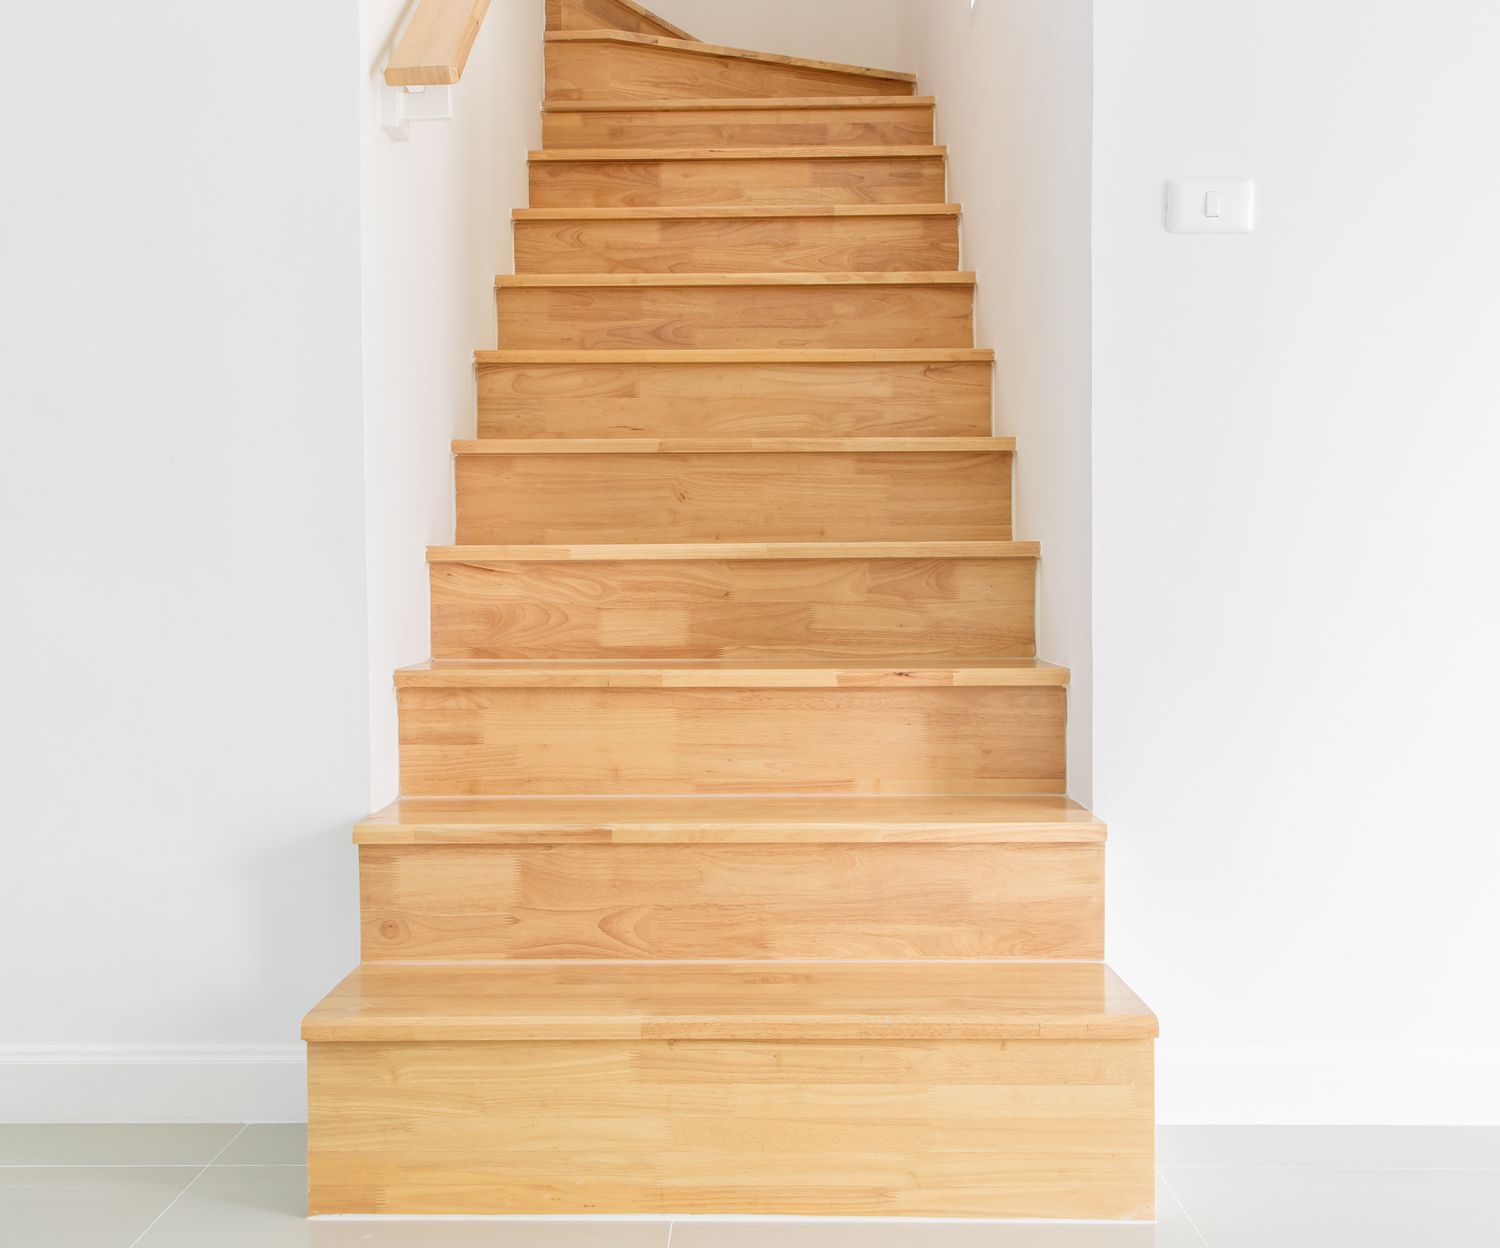 What Is The Maximum Riser Height For Stairs